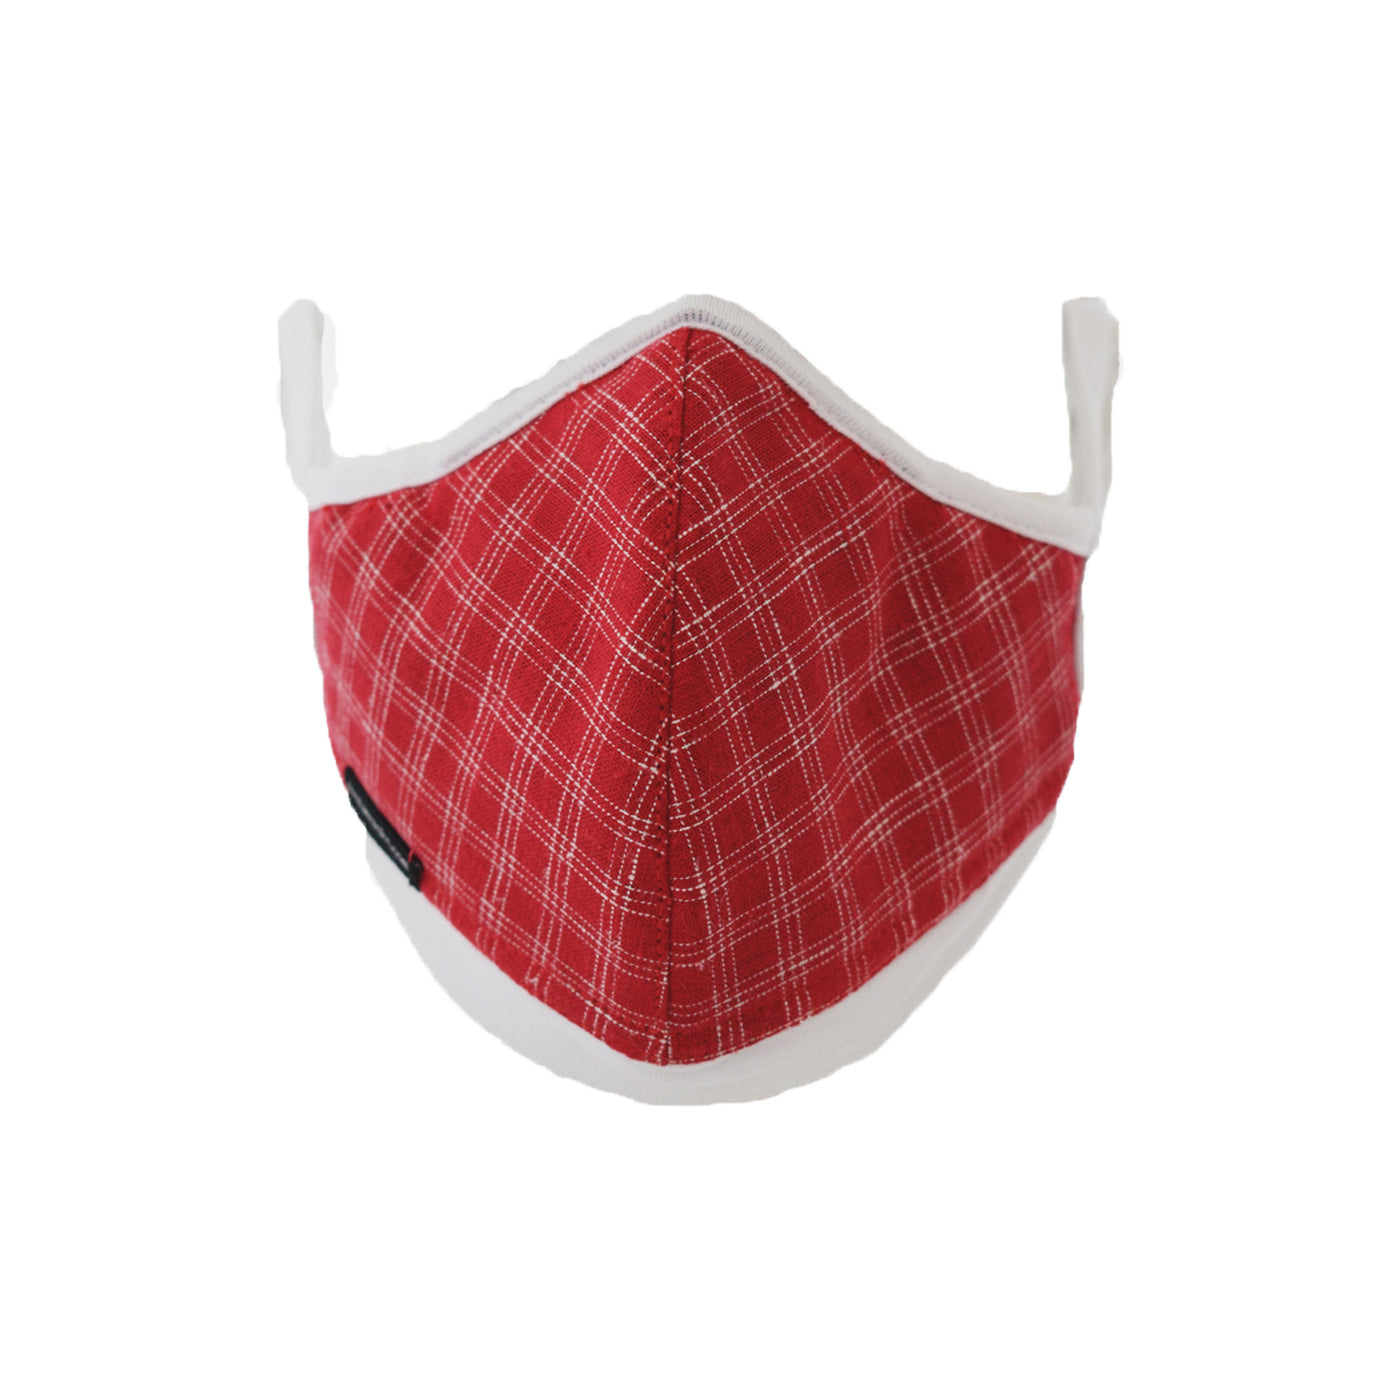 MetaMask: Red Plaid Hemp Mask with Replaceable Filter Sale!